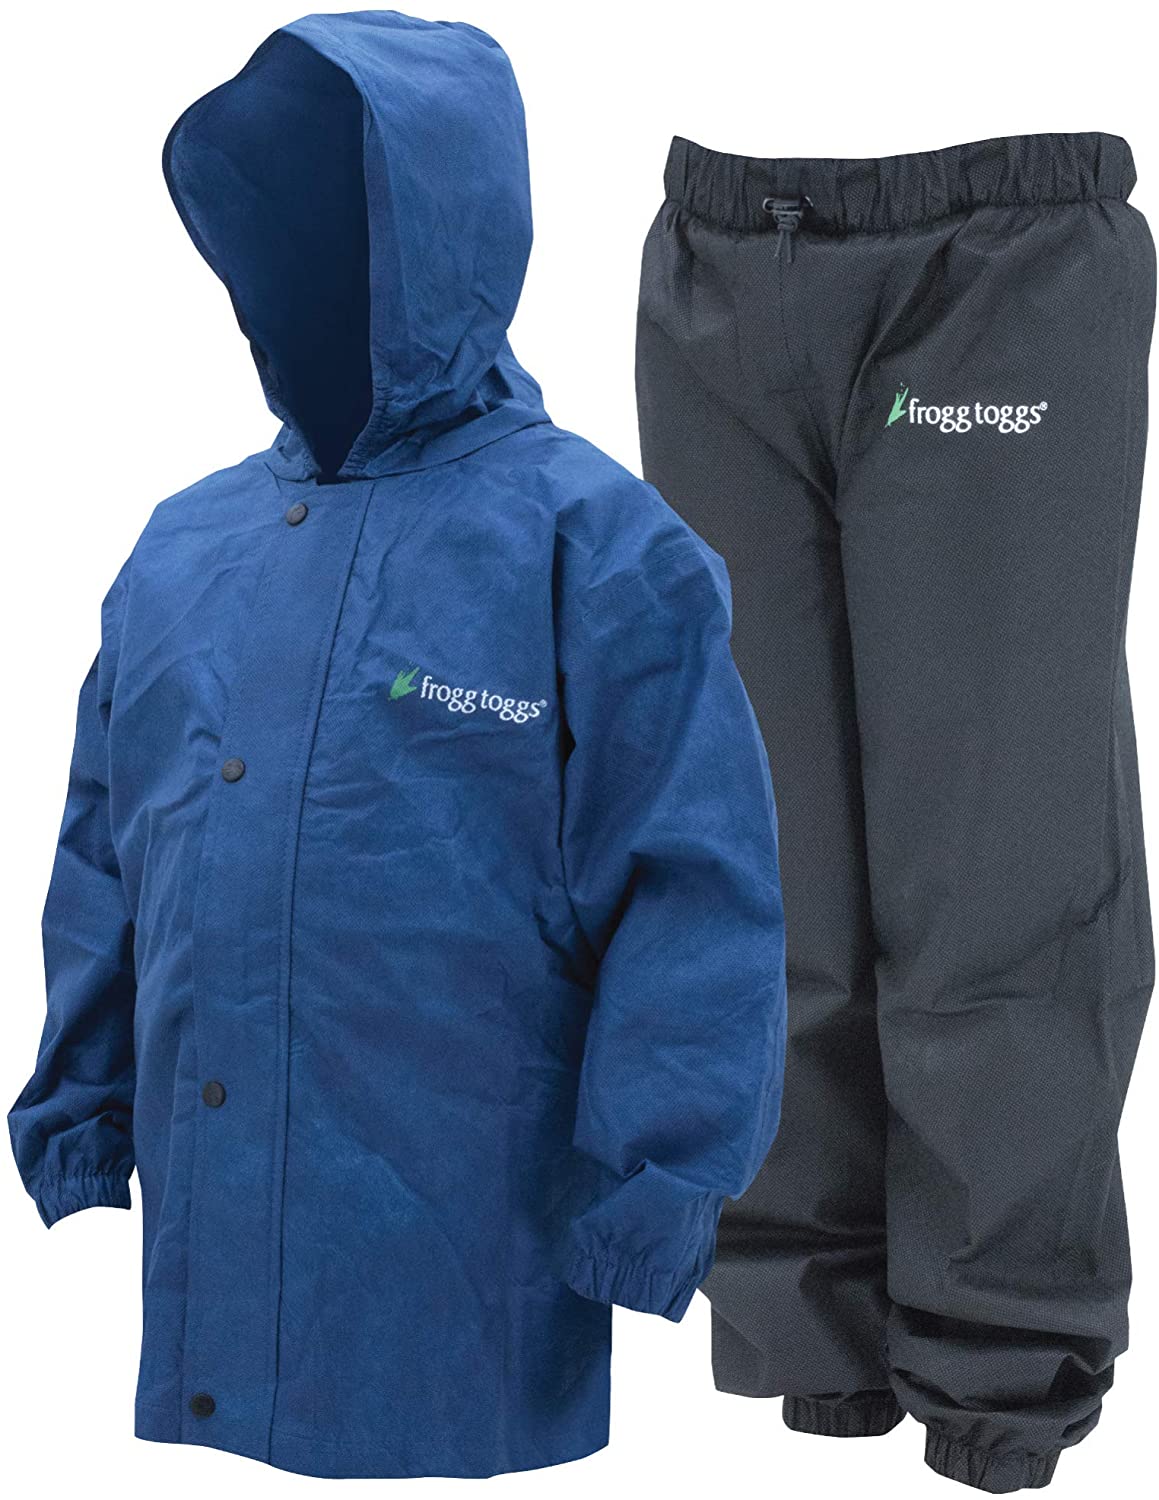 Youth Frogg Toggs Polly Woggs Waterproof Breathable Rain Suit HiVis Green Size Medium 